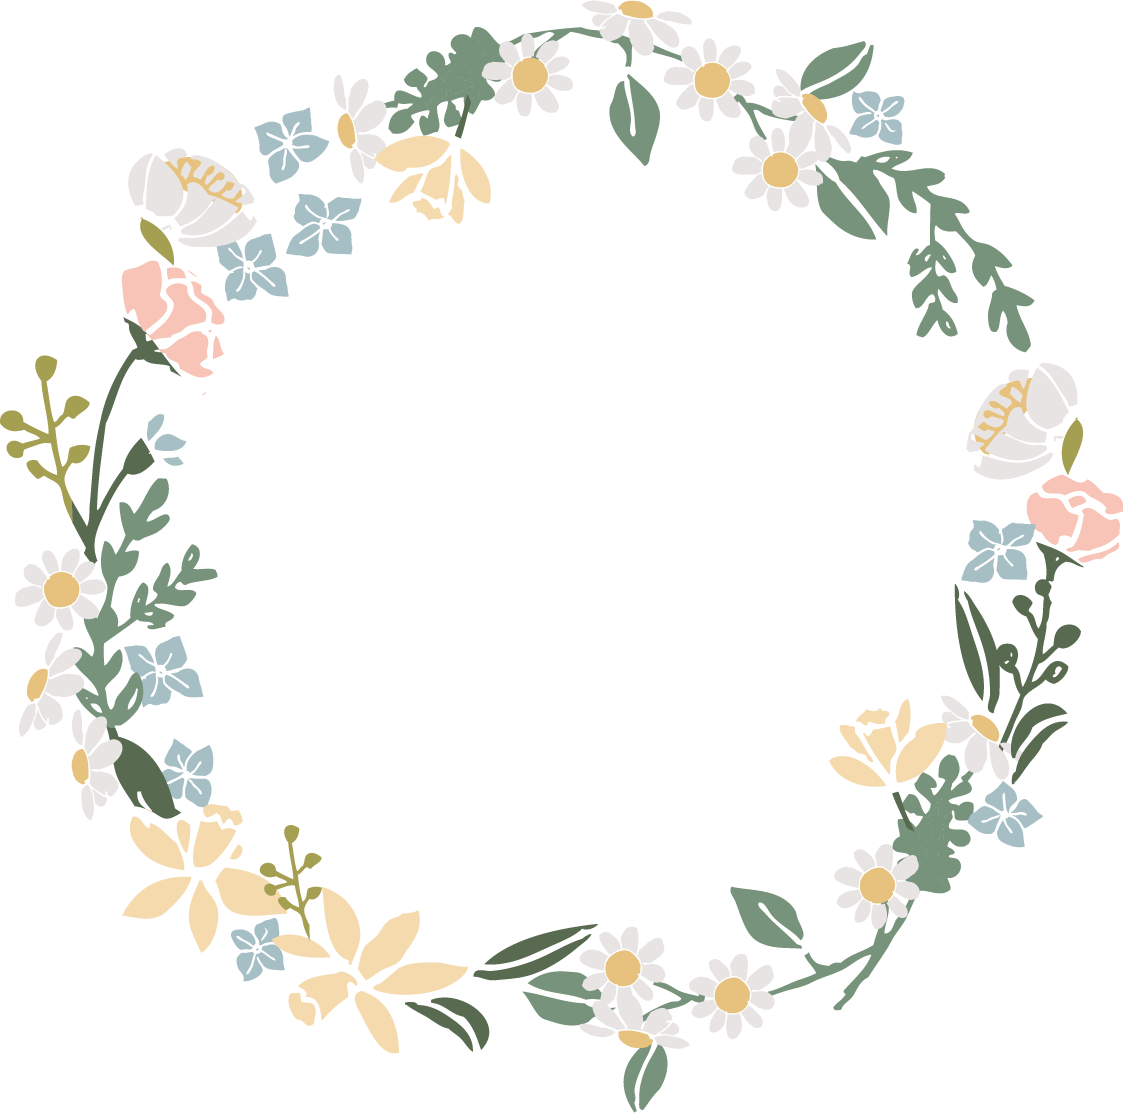 Download wreath with flowers clipart 10 free Cliparts | Download ...